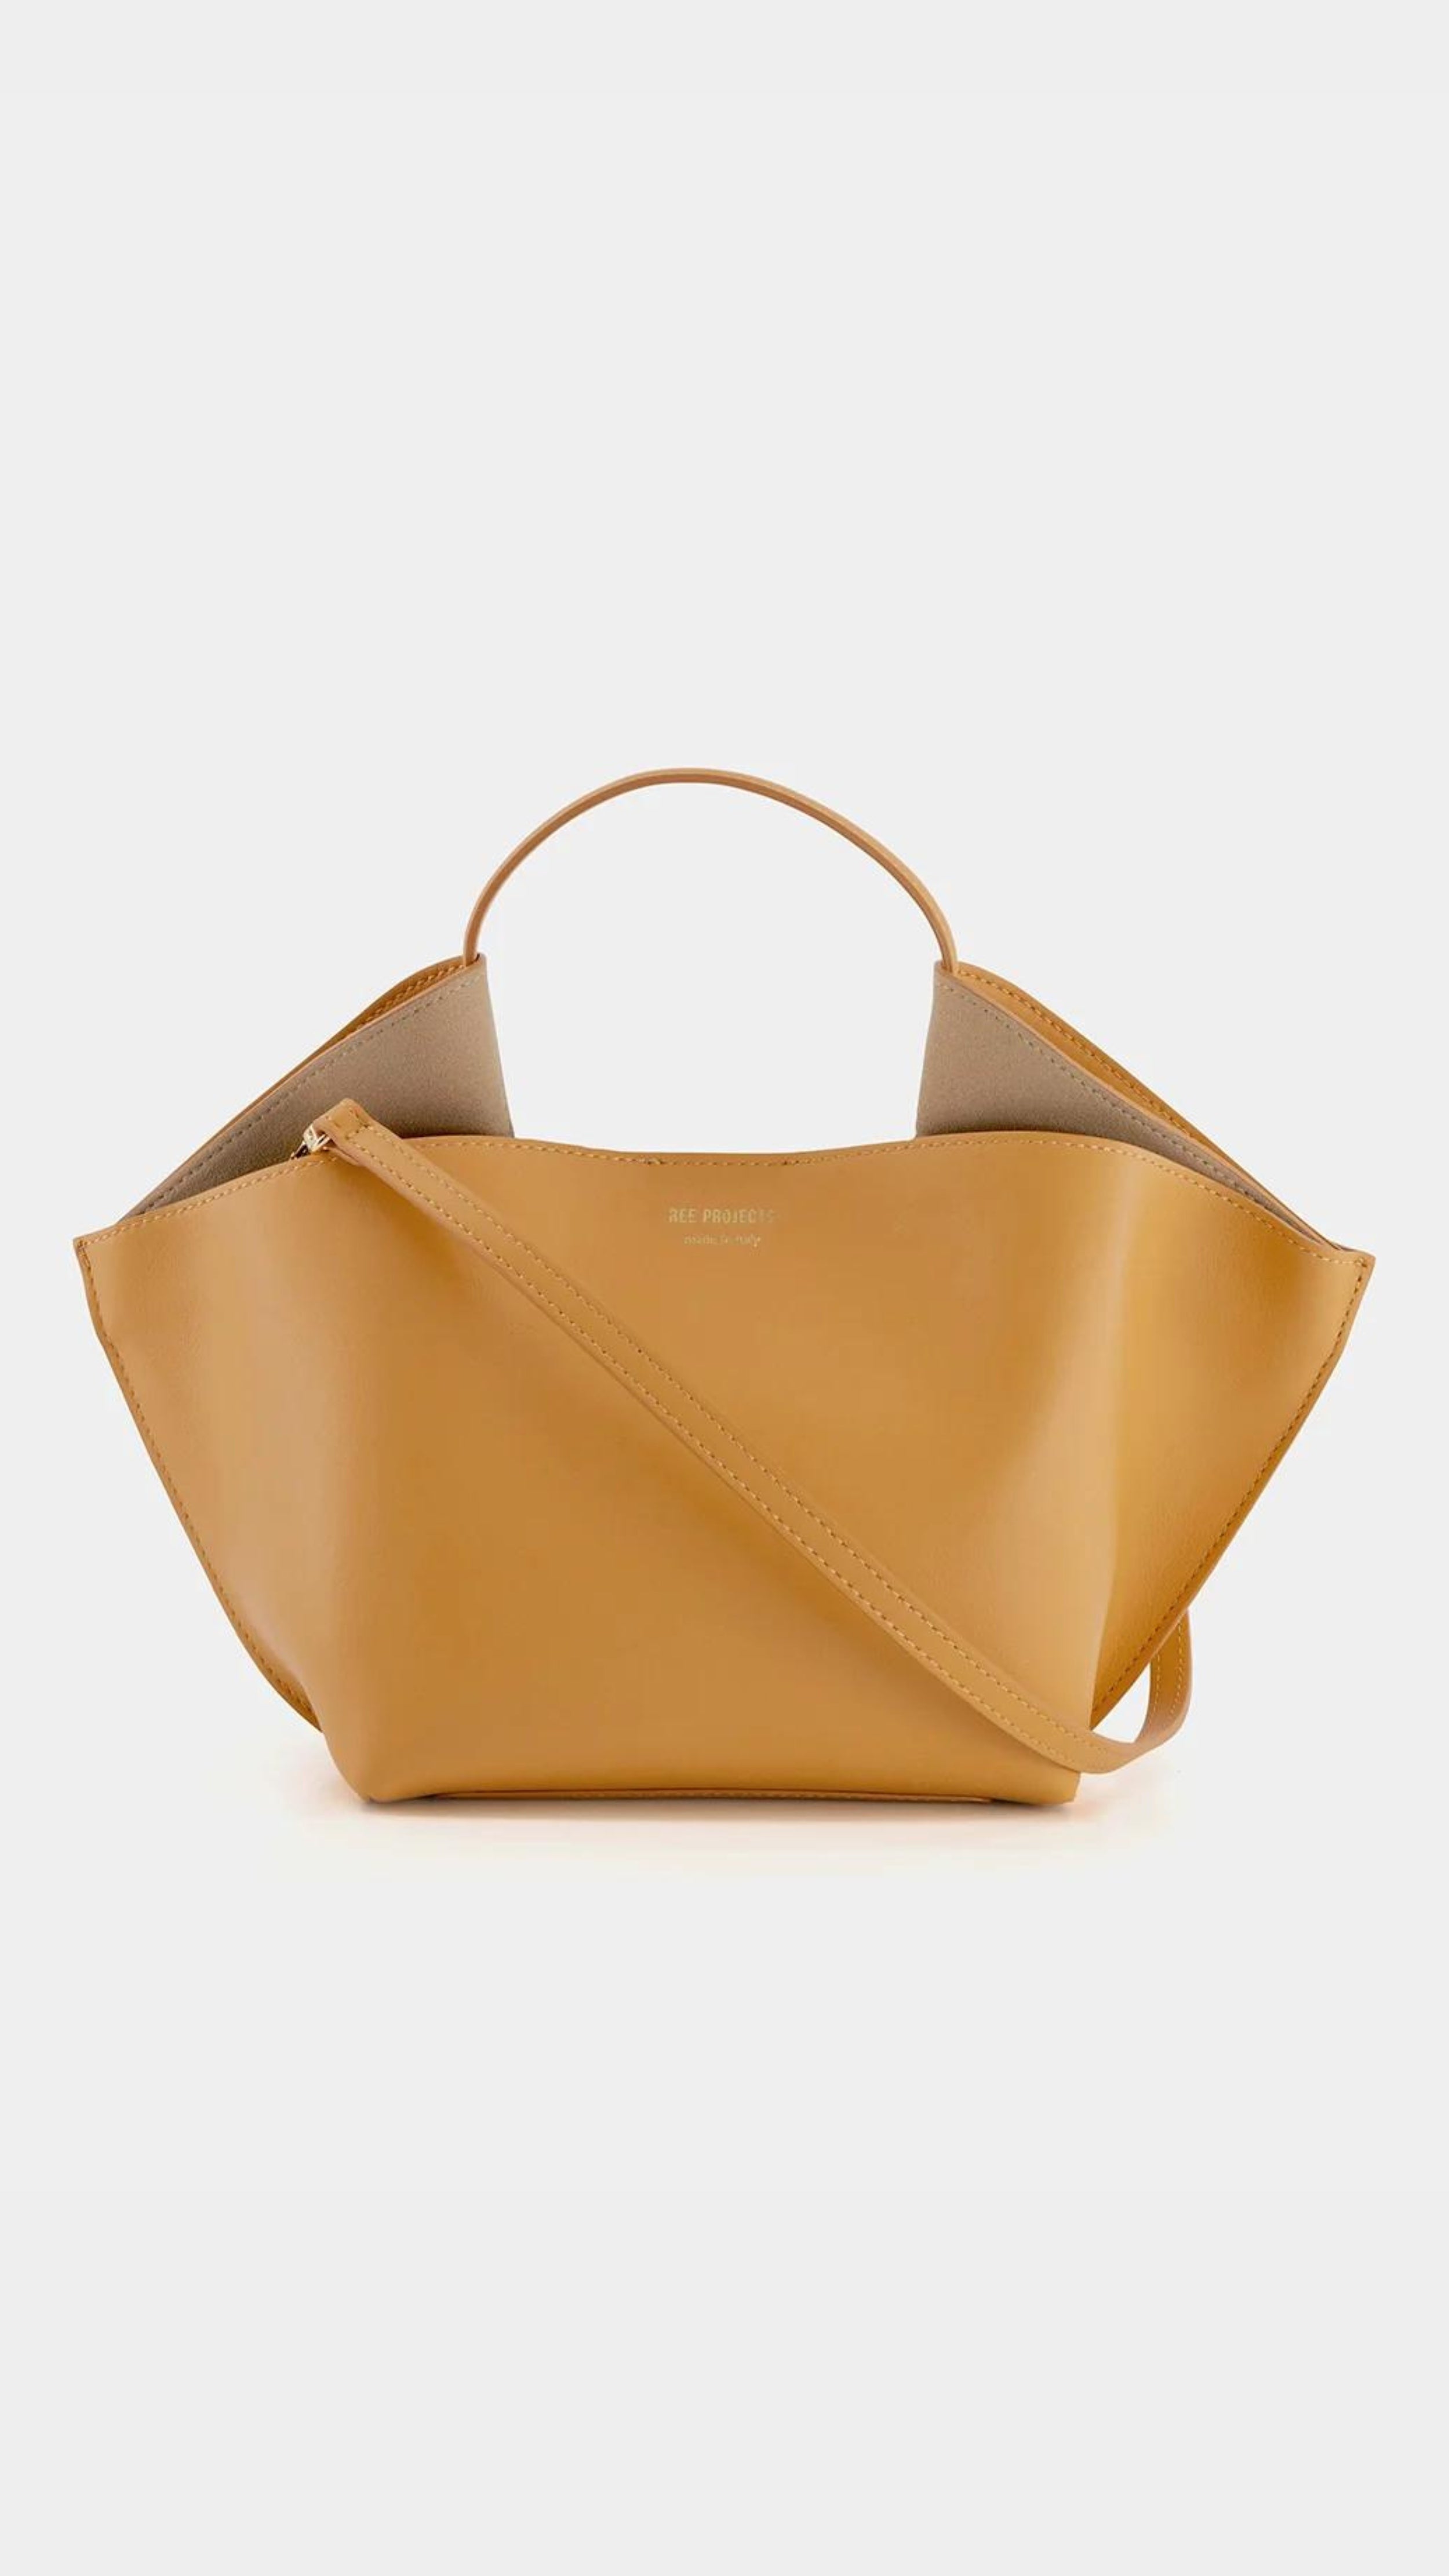 Ree Projects, Anne Tote Mini in Apricot.  An understated elegant every day bag. Crafted from the softest Italian calf leather, this apricot orange  purse features the signature folded 'Ree Projects top-line gussets' and a sculptural silhouette. Its mini-sized size easily fits your phone, tablet and other items. This purse can be used with the top handle or as a crossbody. It features interior pockets and a magnet snap closure.  Shown from the back with crossbody strap.